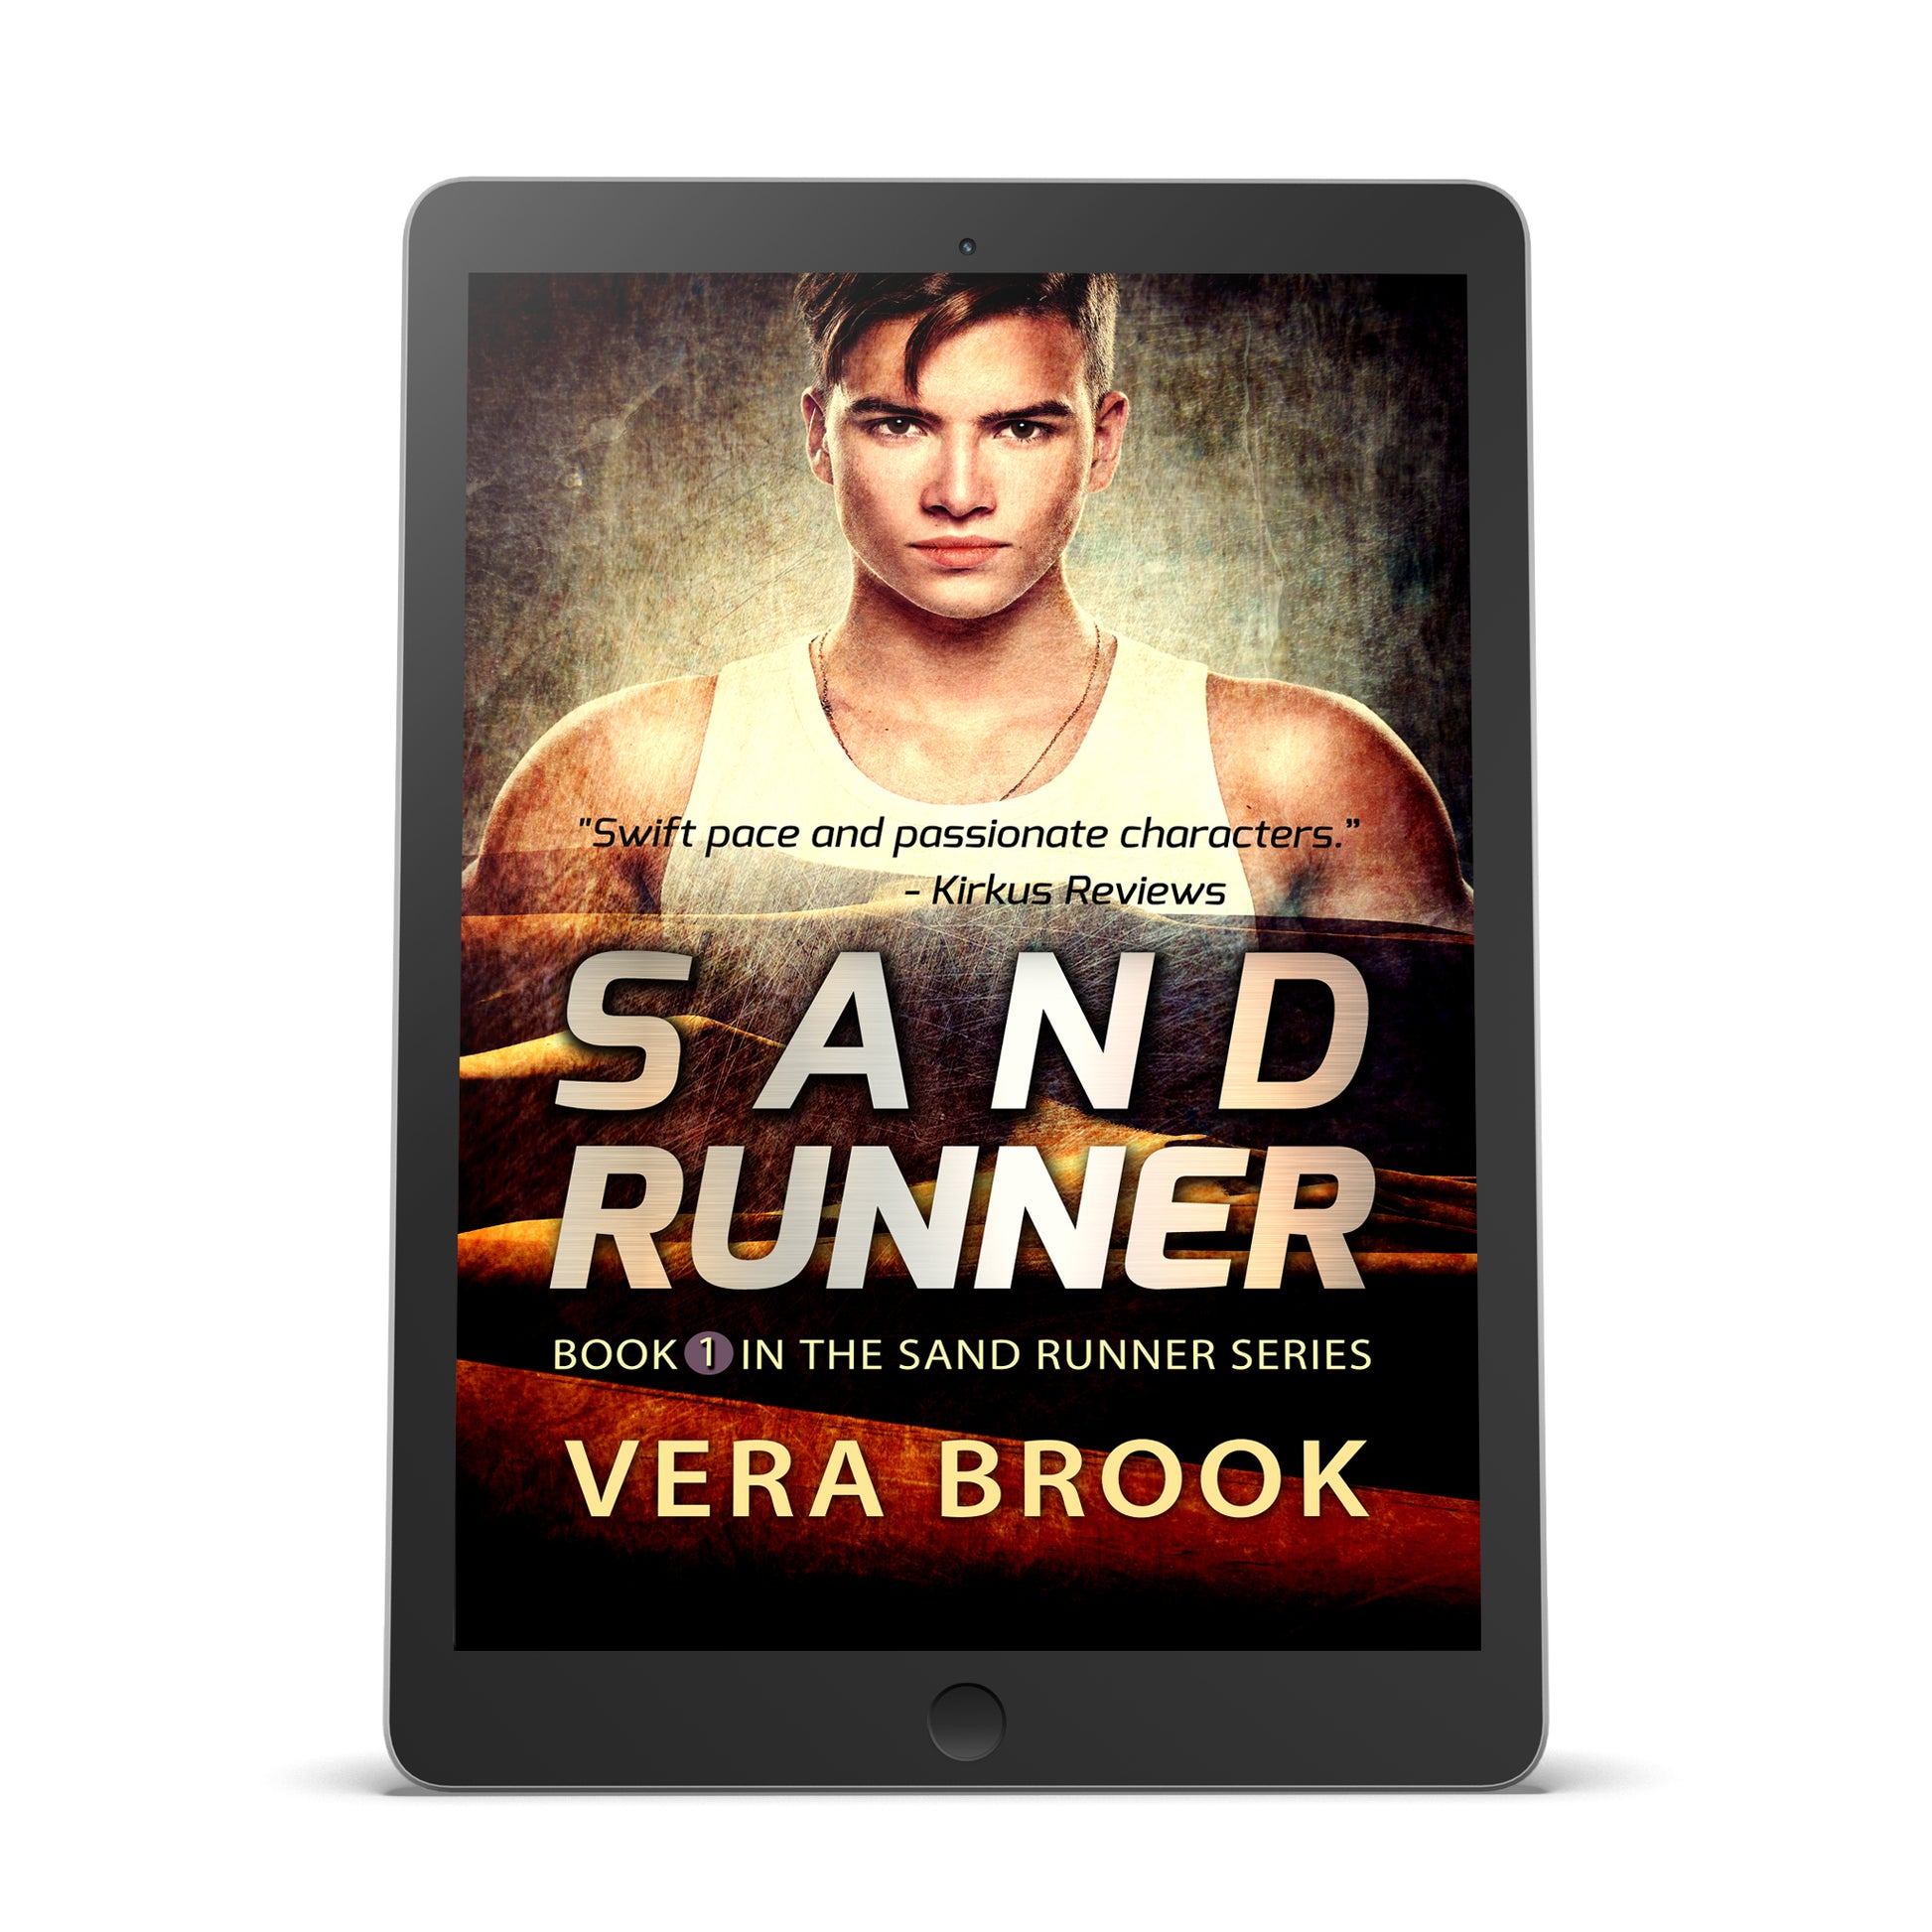 Ebook cover of SAND RUNNER, a YA dystopian novel by Vera Brook. SAND RUNNER is Book 1 in the Sand Runner Series. The cover shows an athletic, handsome, determined young man superimposed on a landscape of a harsh desert. The title is in block metallic letters.